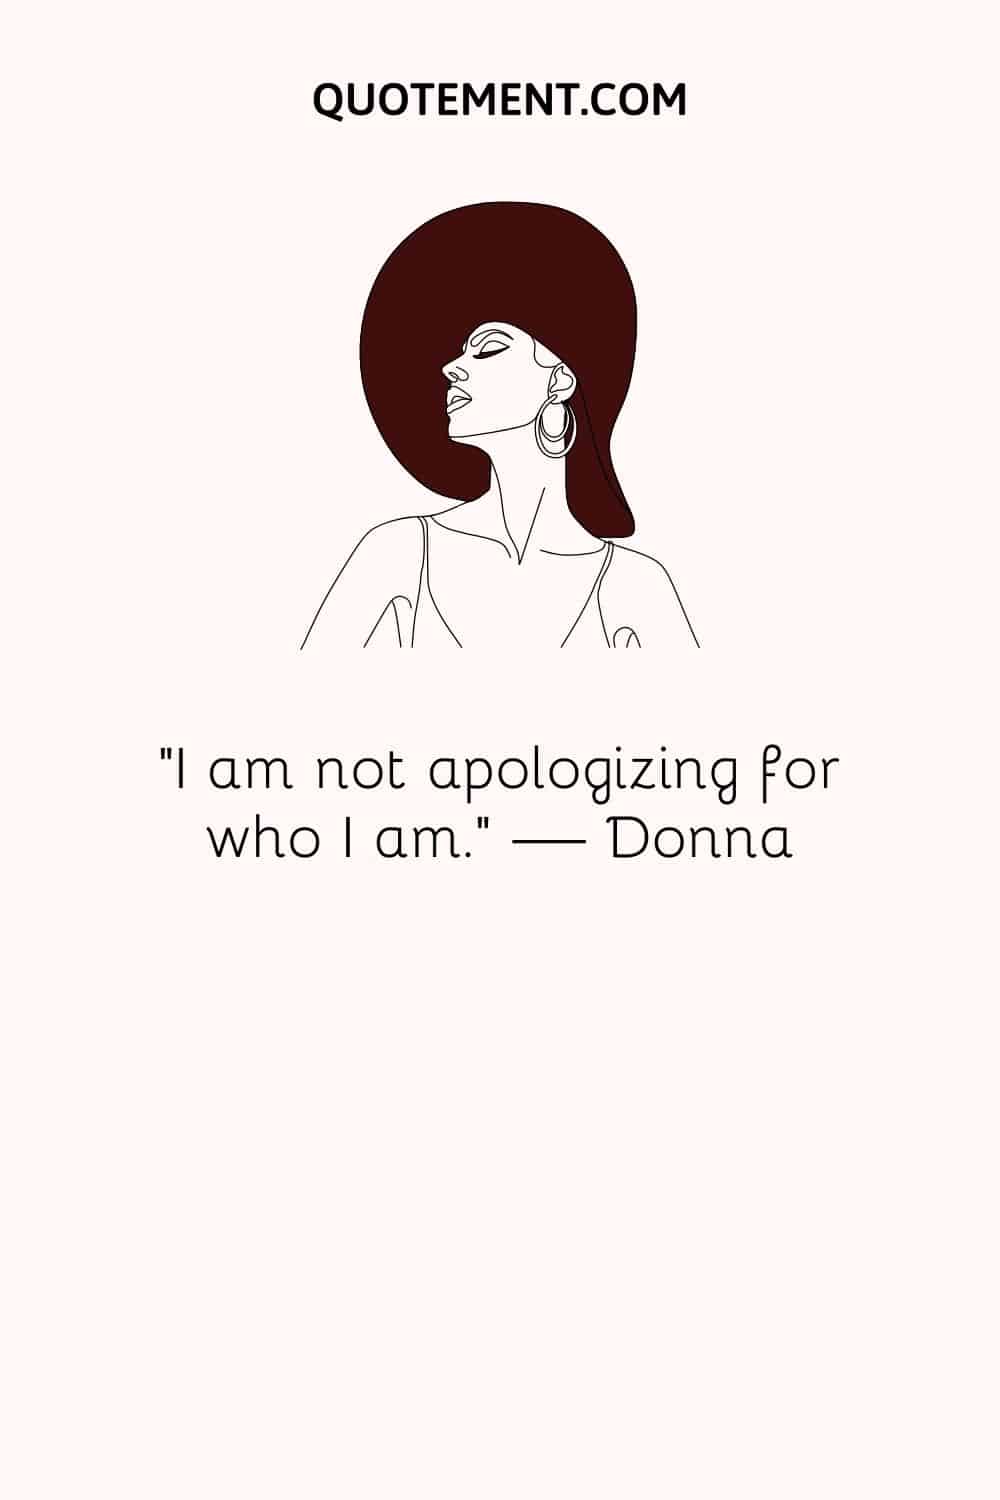 “I am not apologizing for who I am.” ― Donna